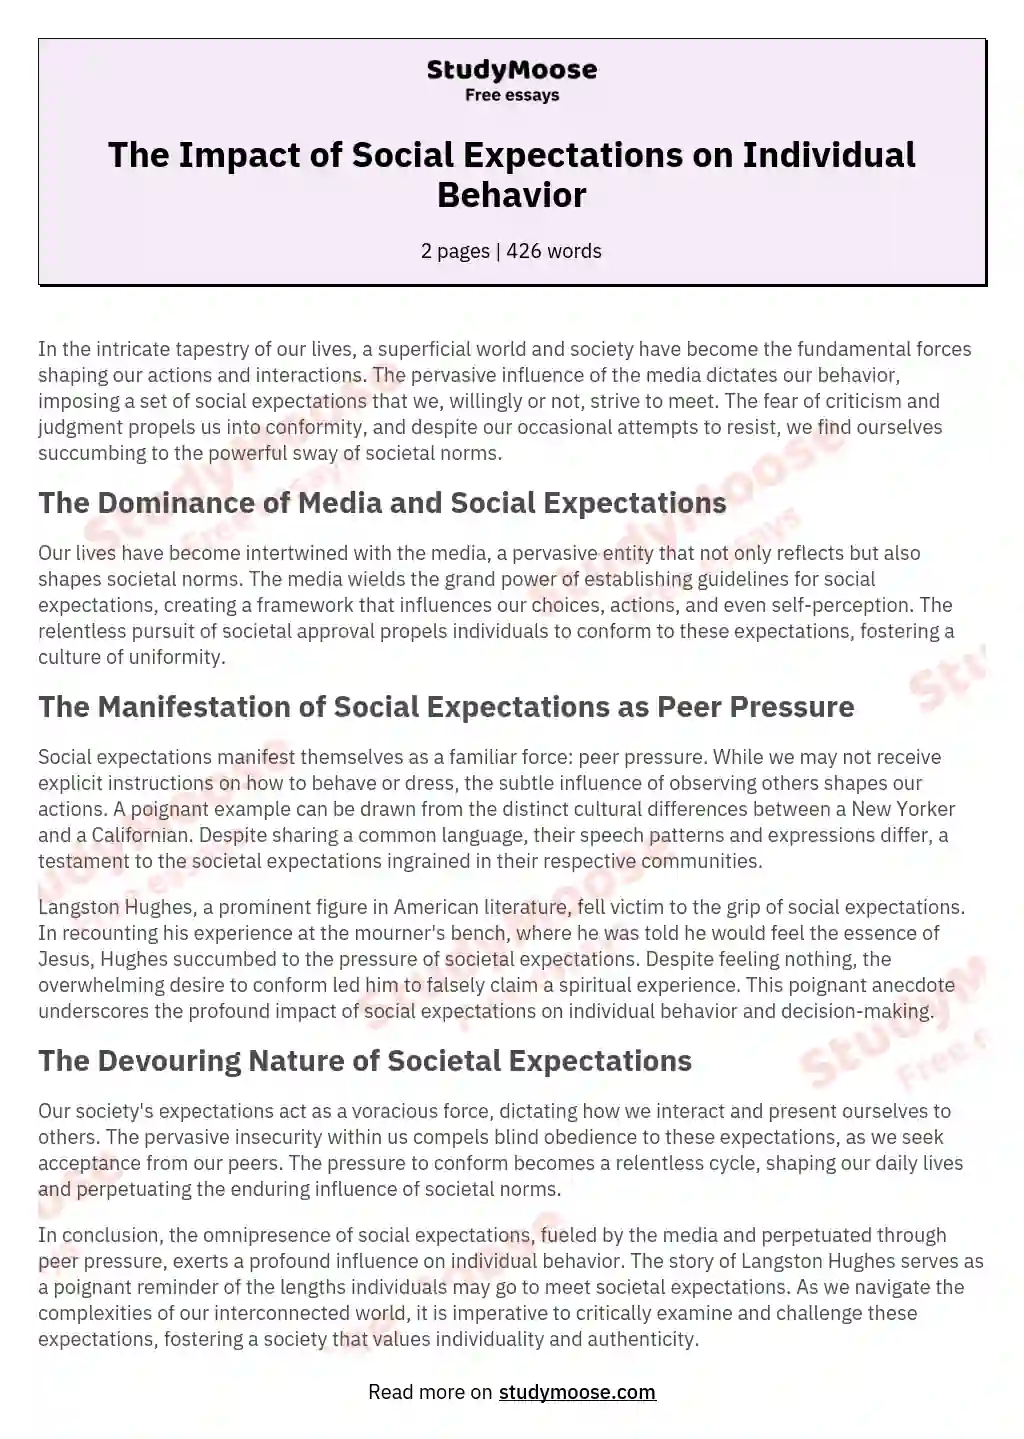 The Impact of Social Expectations on Individual Behavior essay